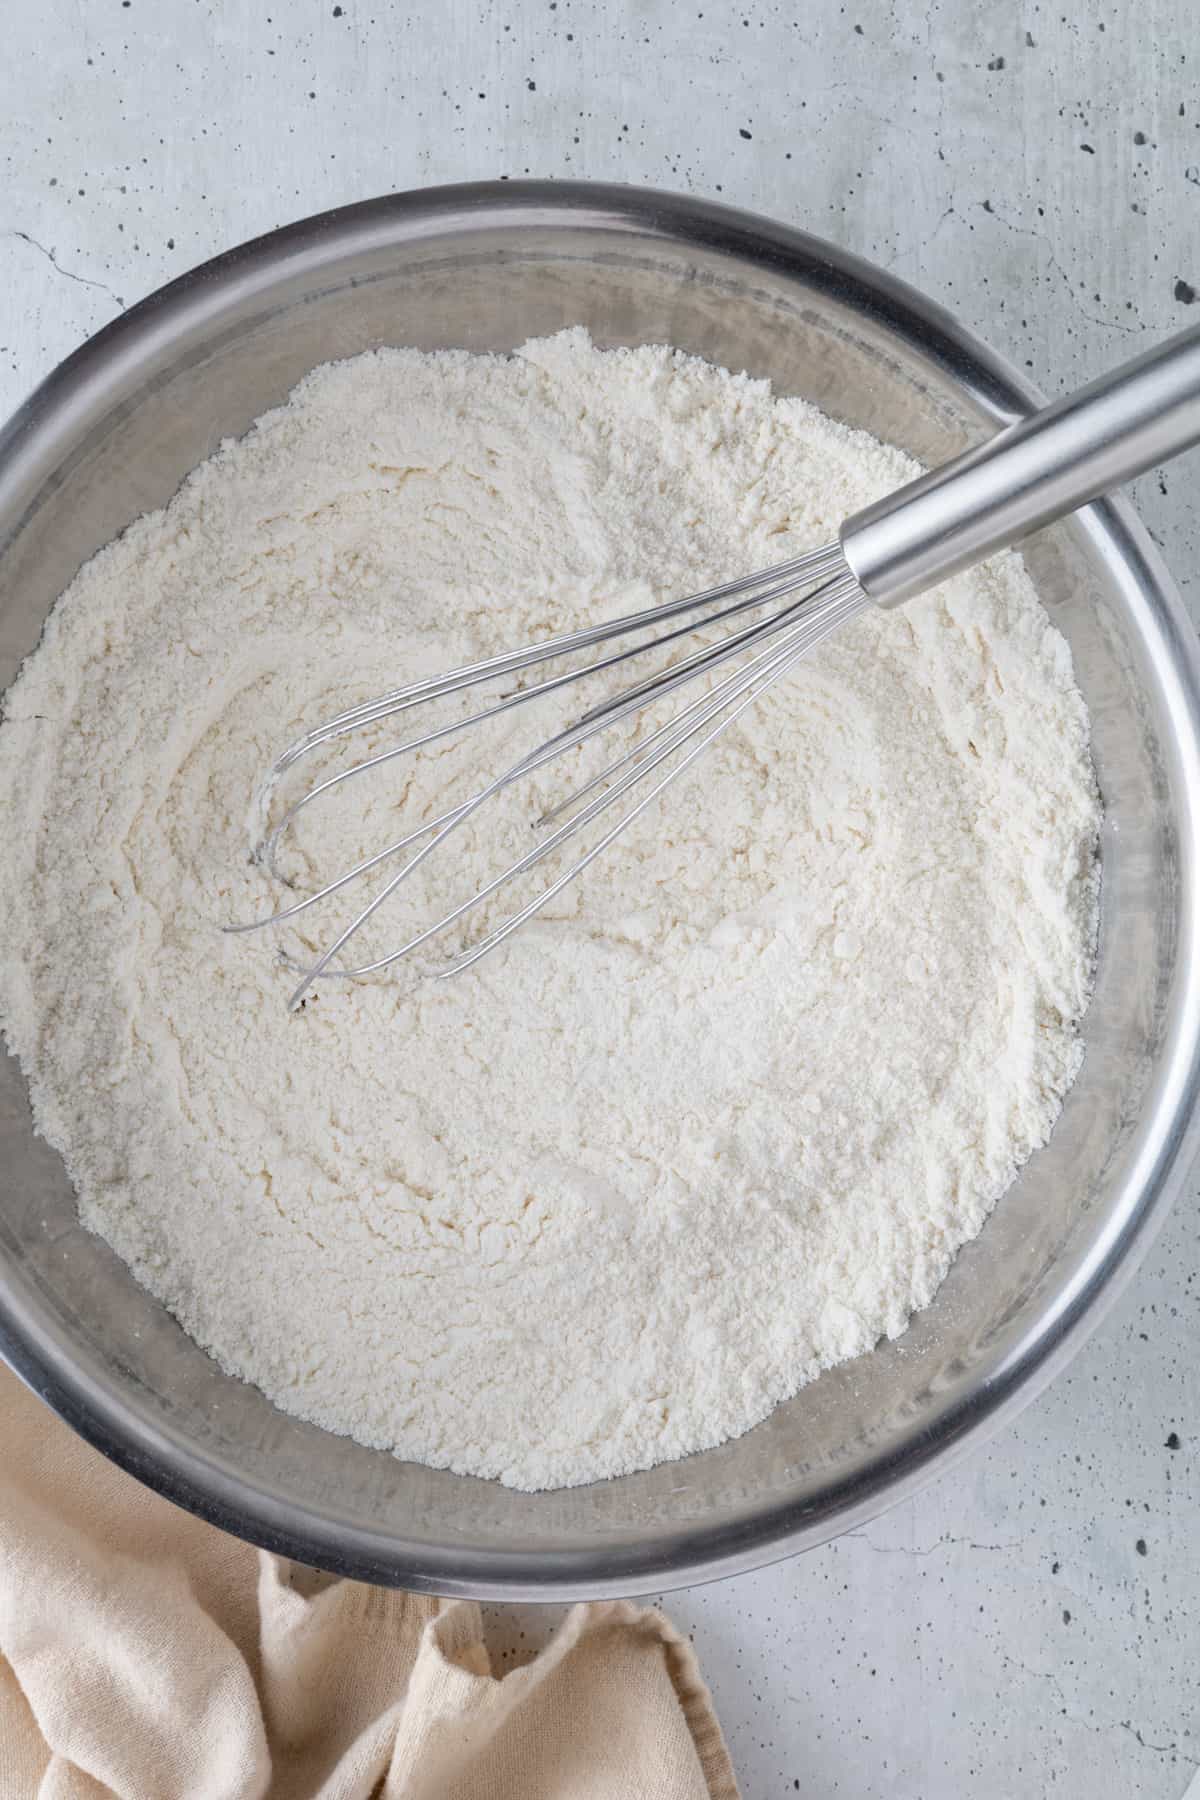 The dry ingredients in a medium bowl with a whisk.